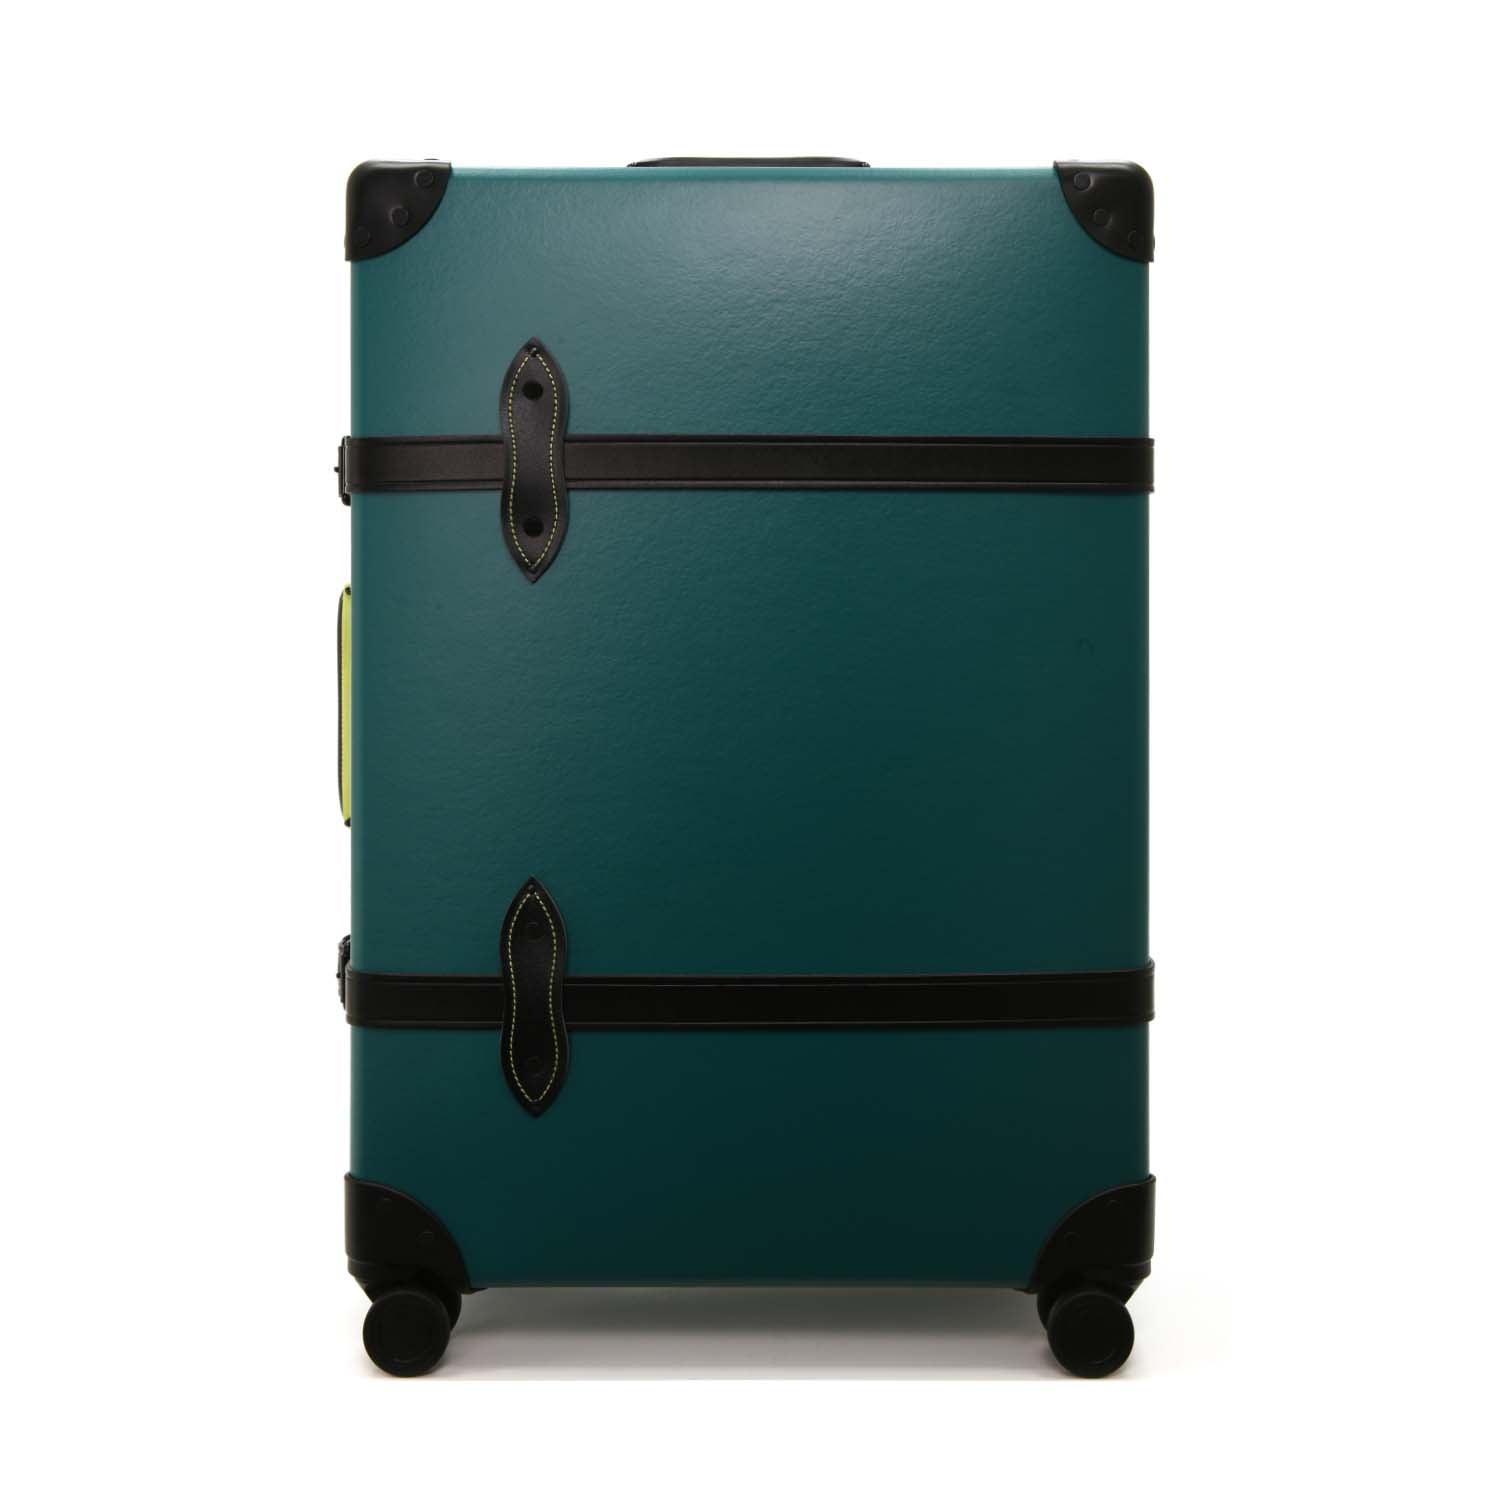 Aston Martin F1 Luggage | AM x Globe-Trotter Suitcase Collection